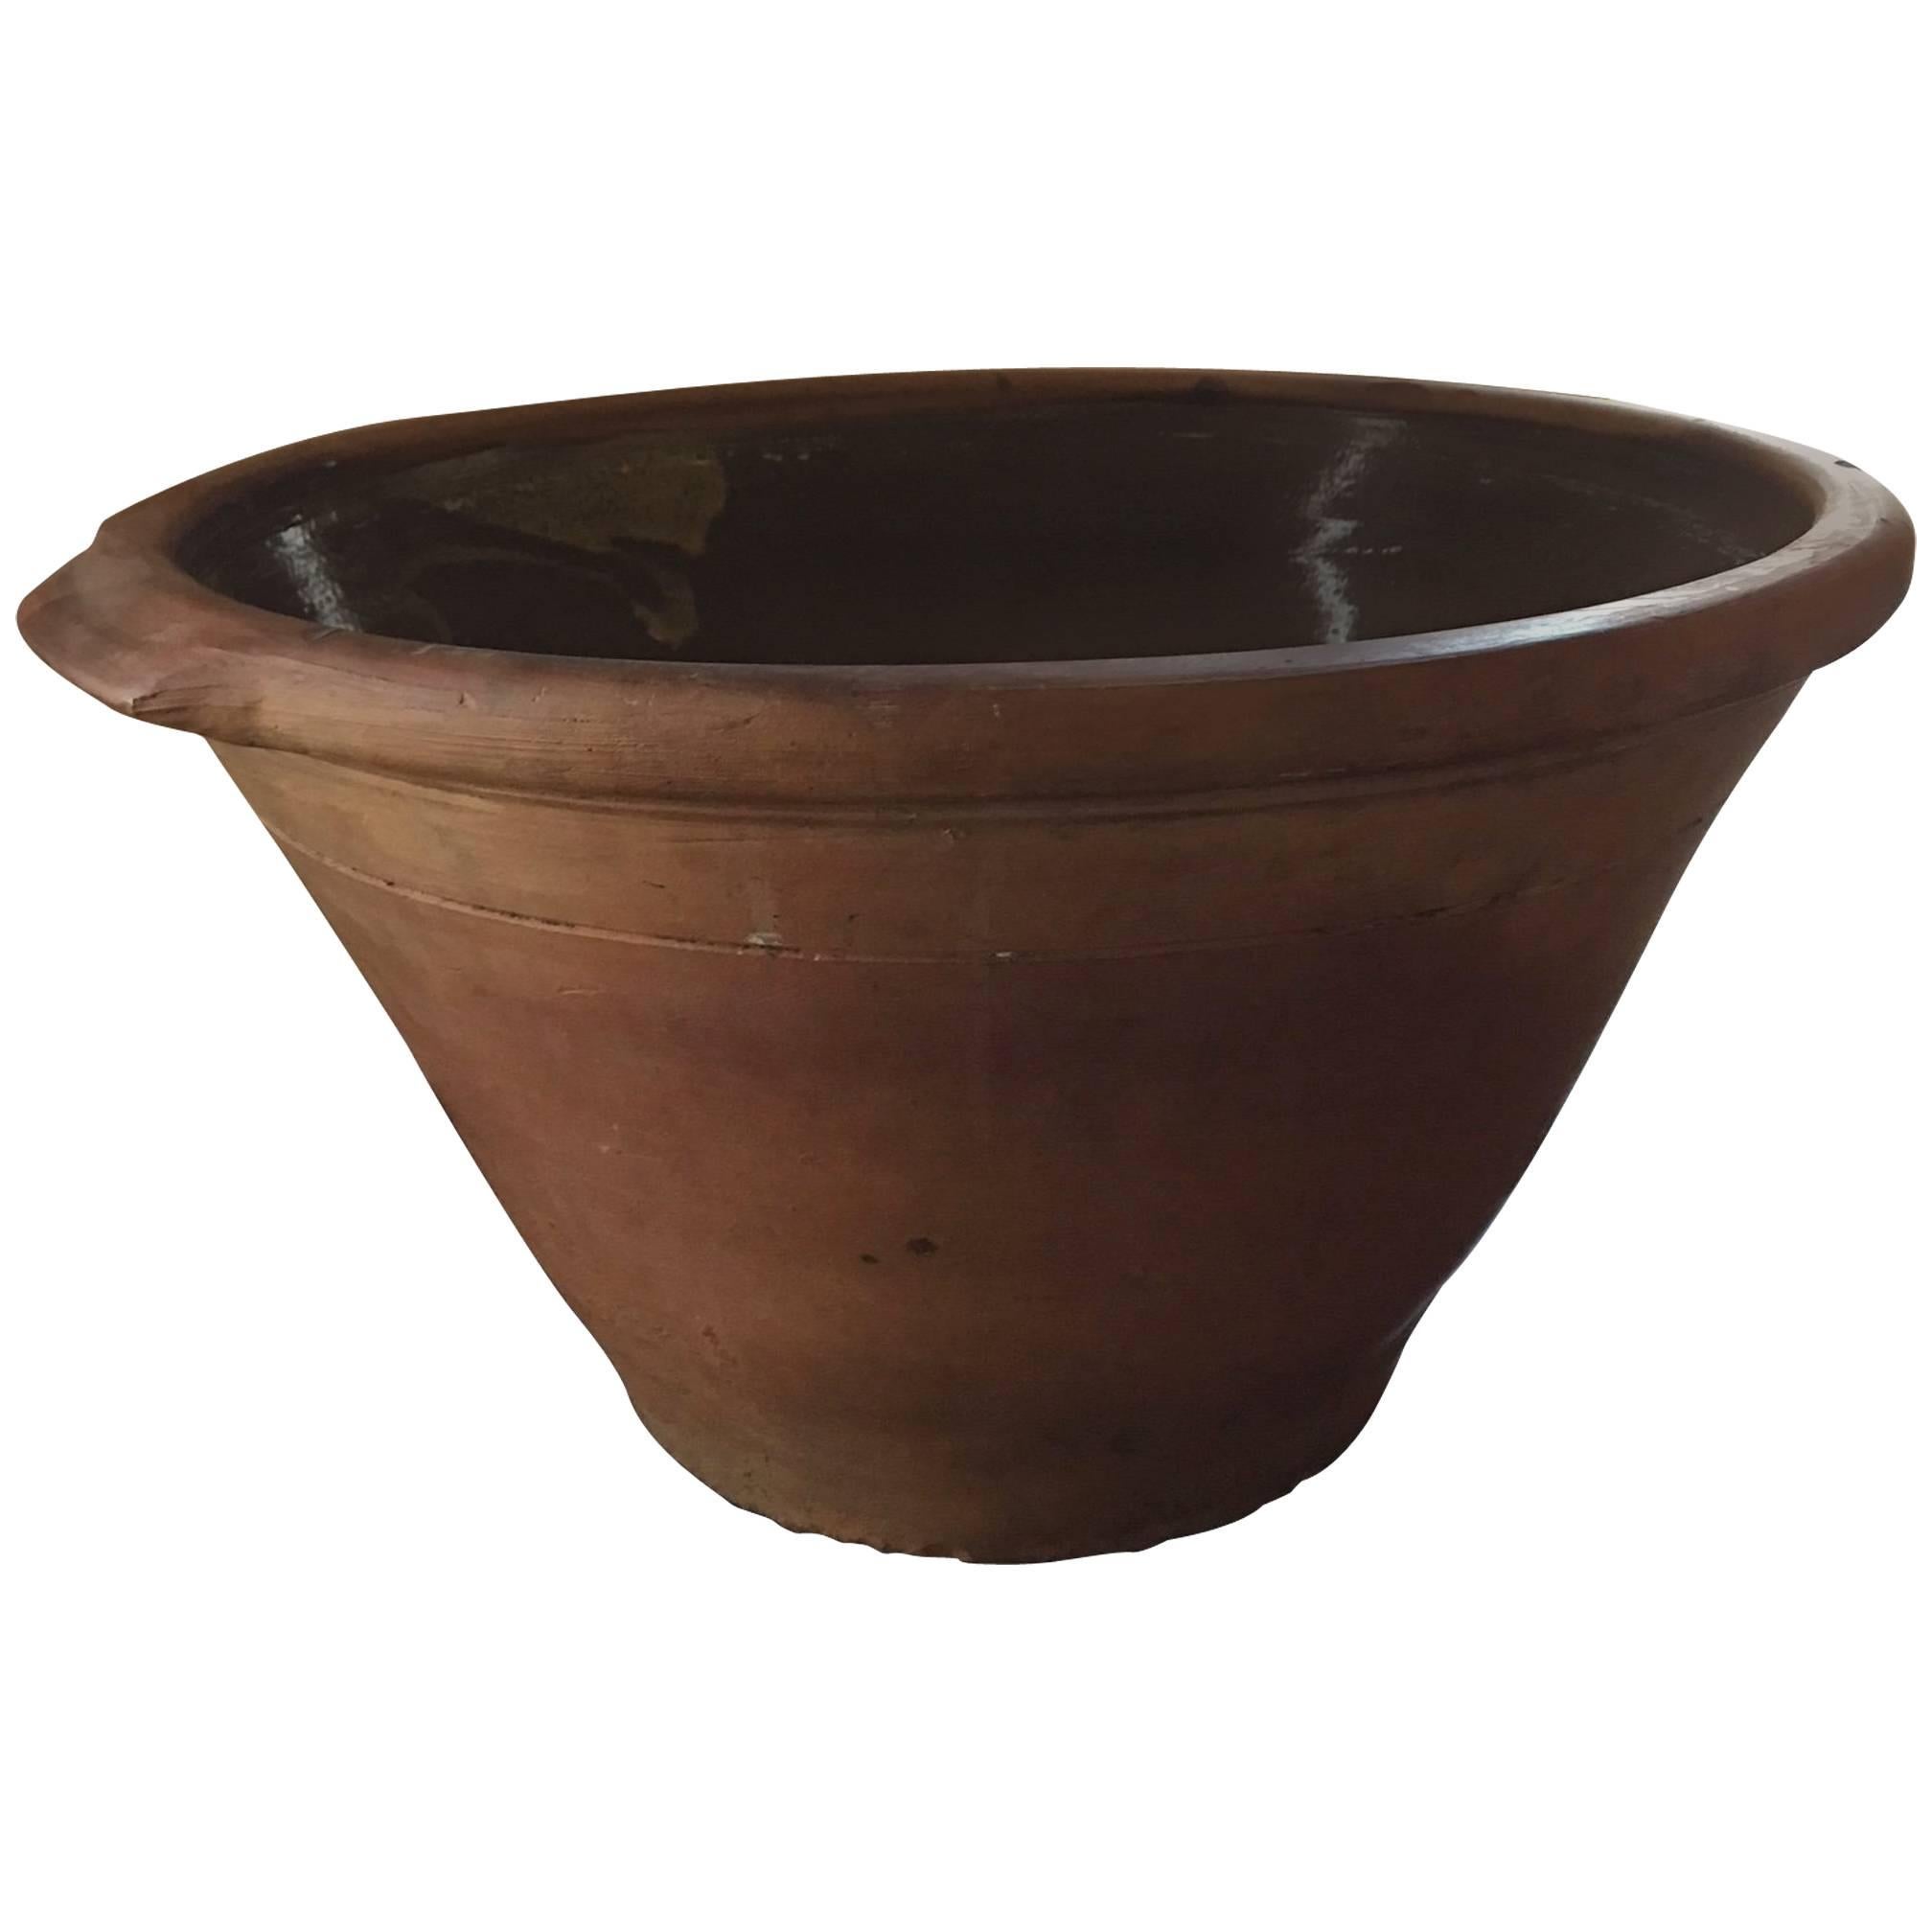 Large Terracotta Bowl, Late 20th Century